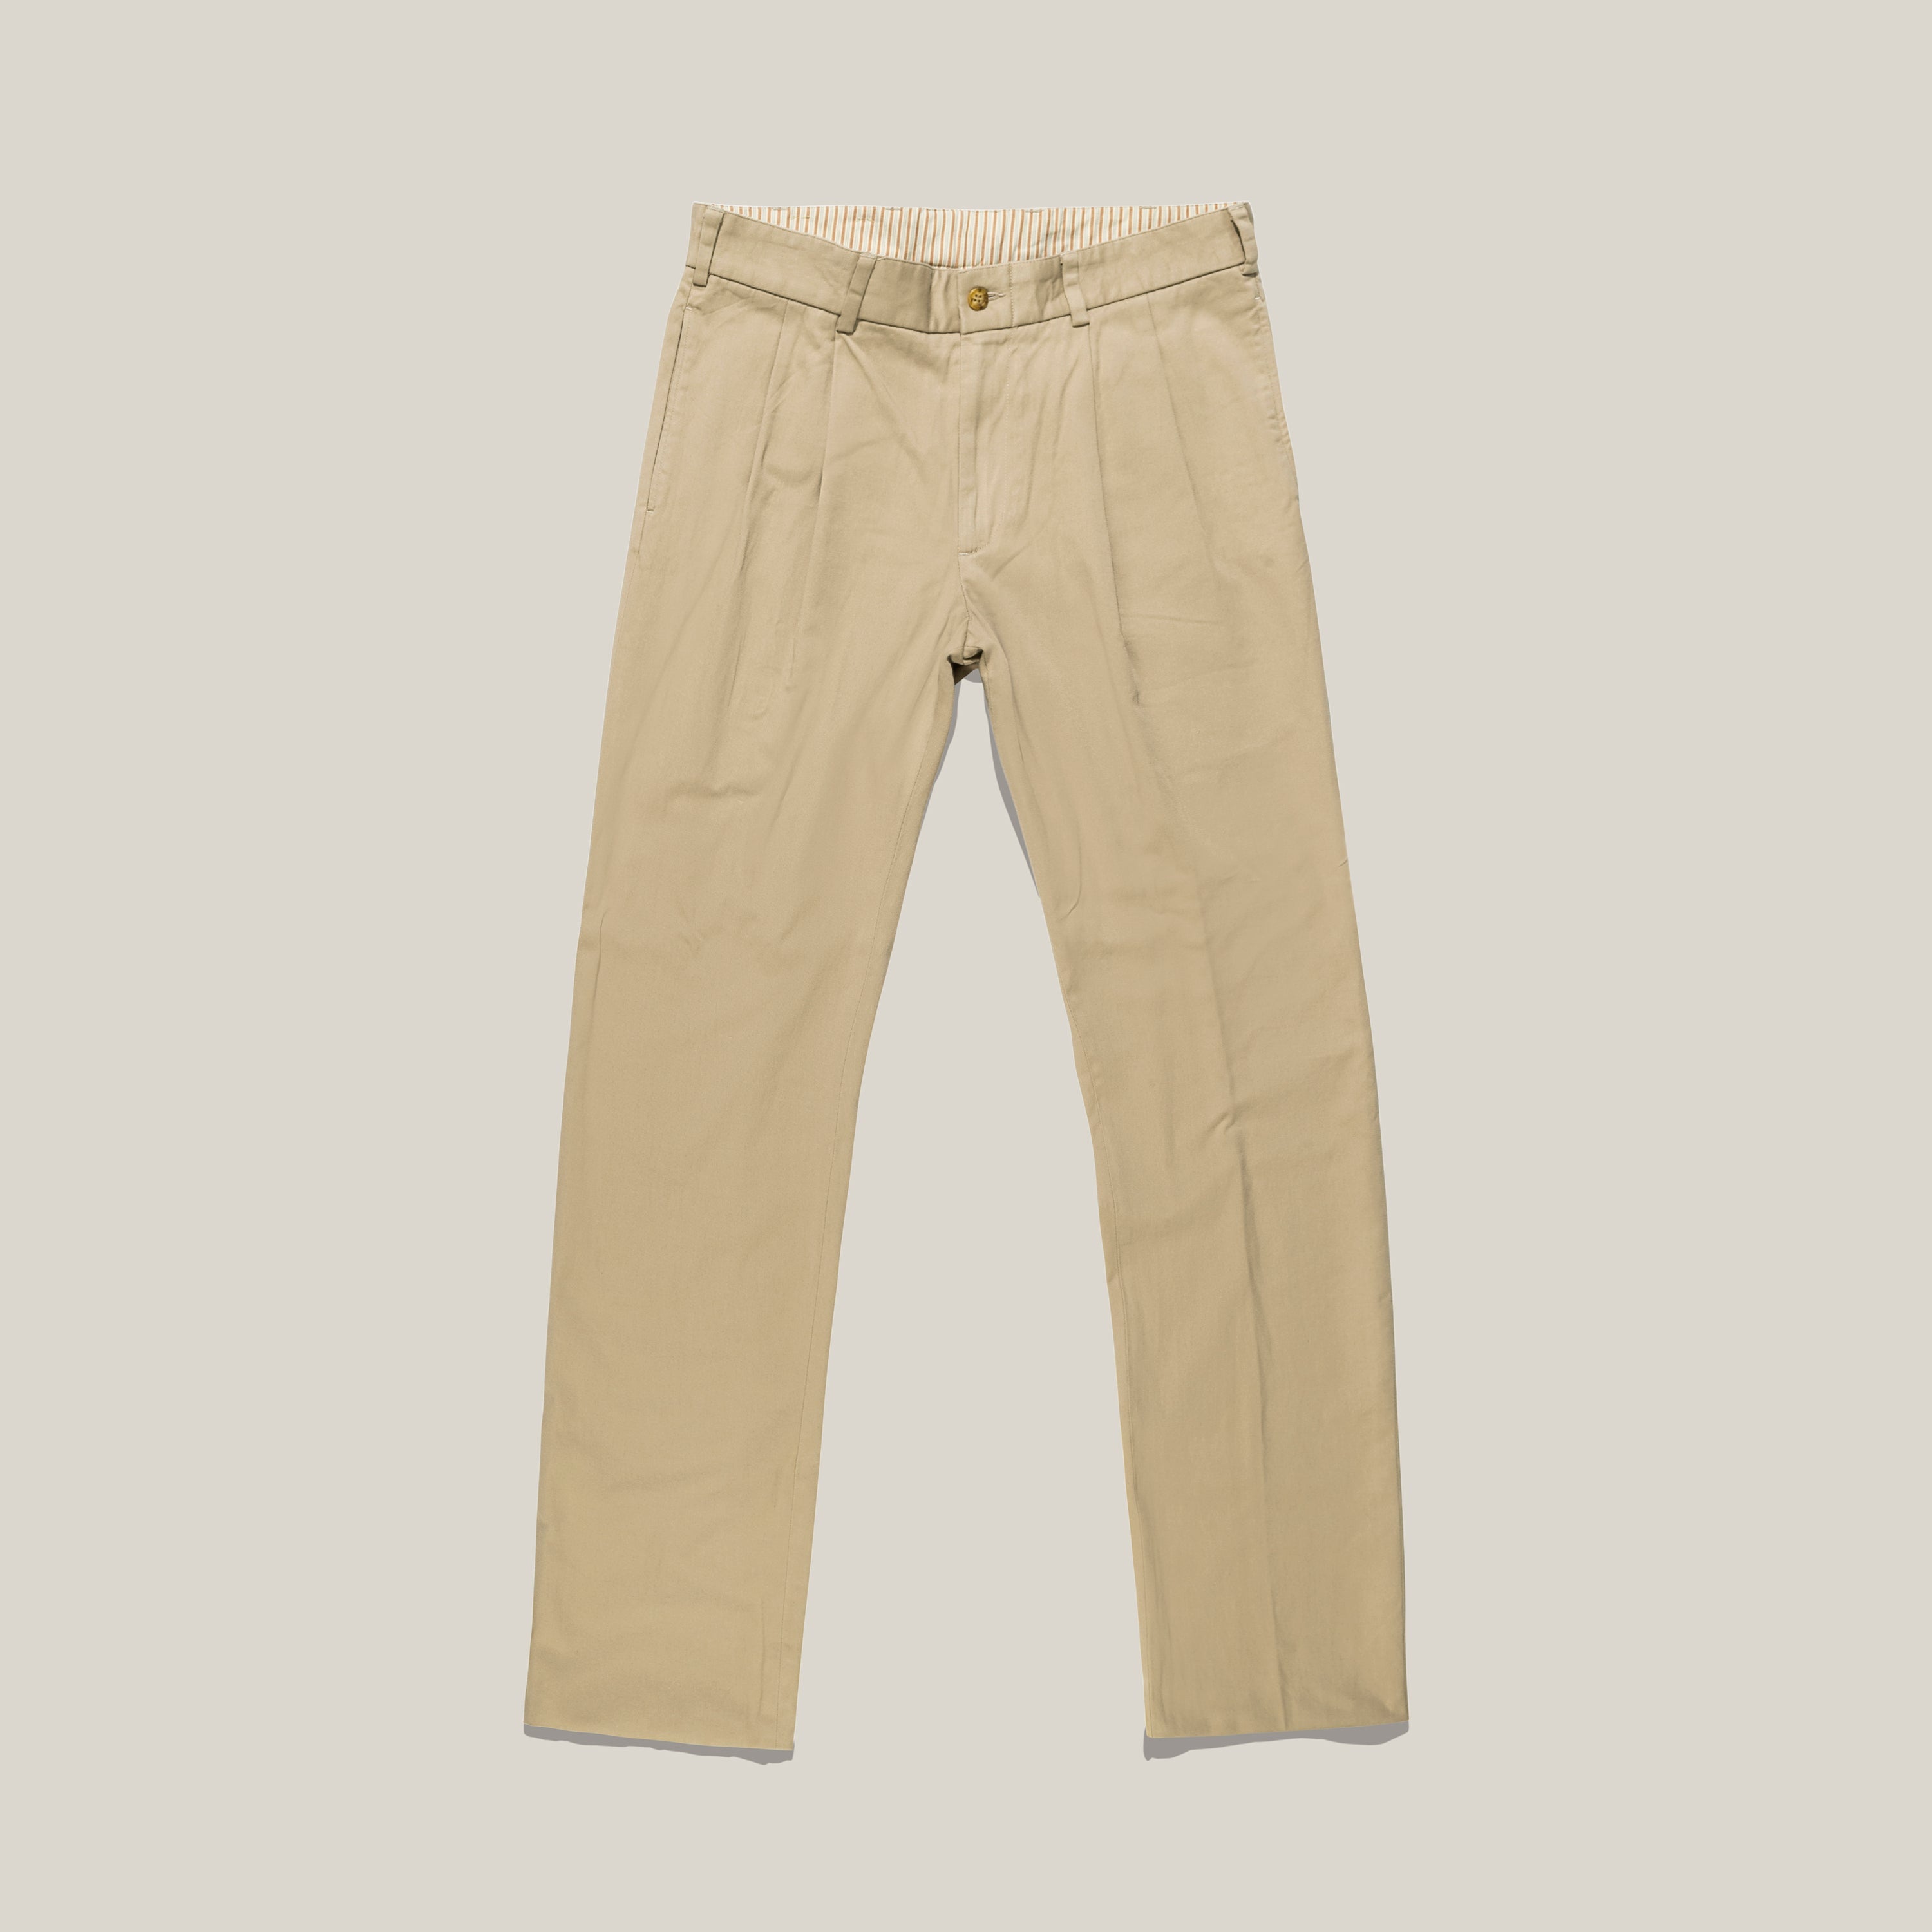 M2P - Classic Fit Pleated - Vintage Twill